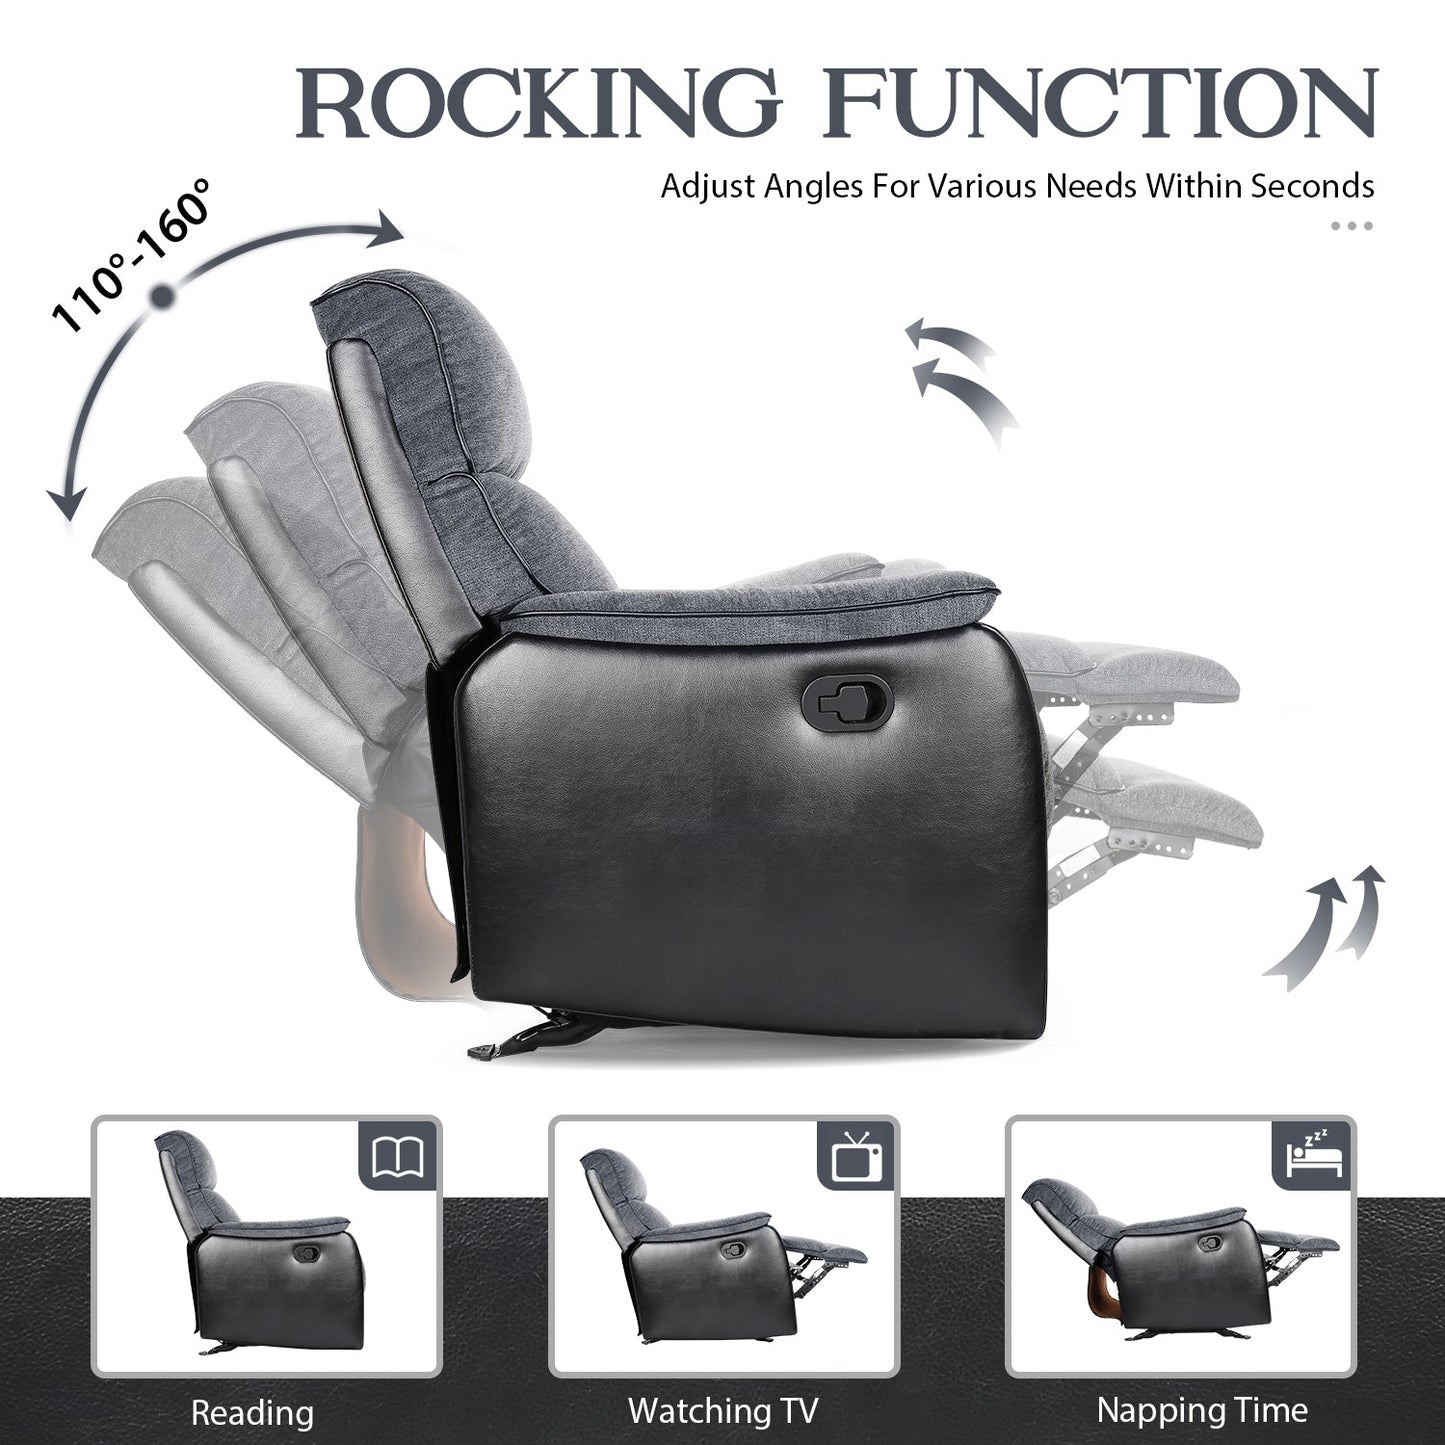 TACKspace Manual Recliner Chair with Comfortable Material, 30° Back & Forward Rock and Infinite Recline Angle, Living Room Single Sofa Rocker Recliners for Adults